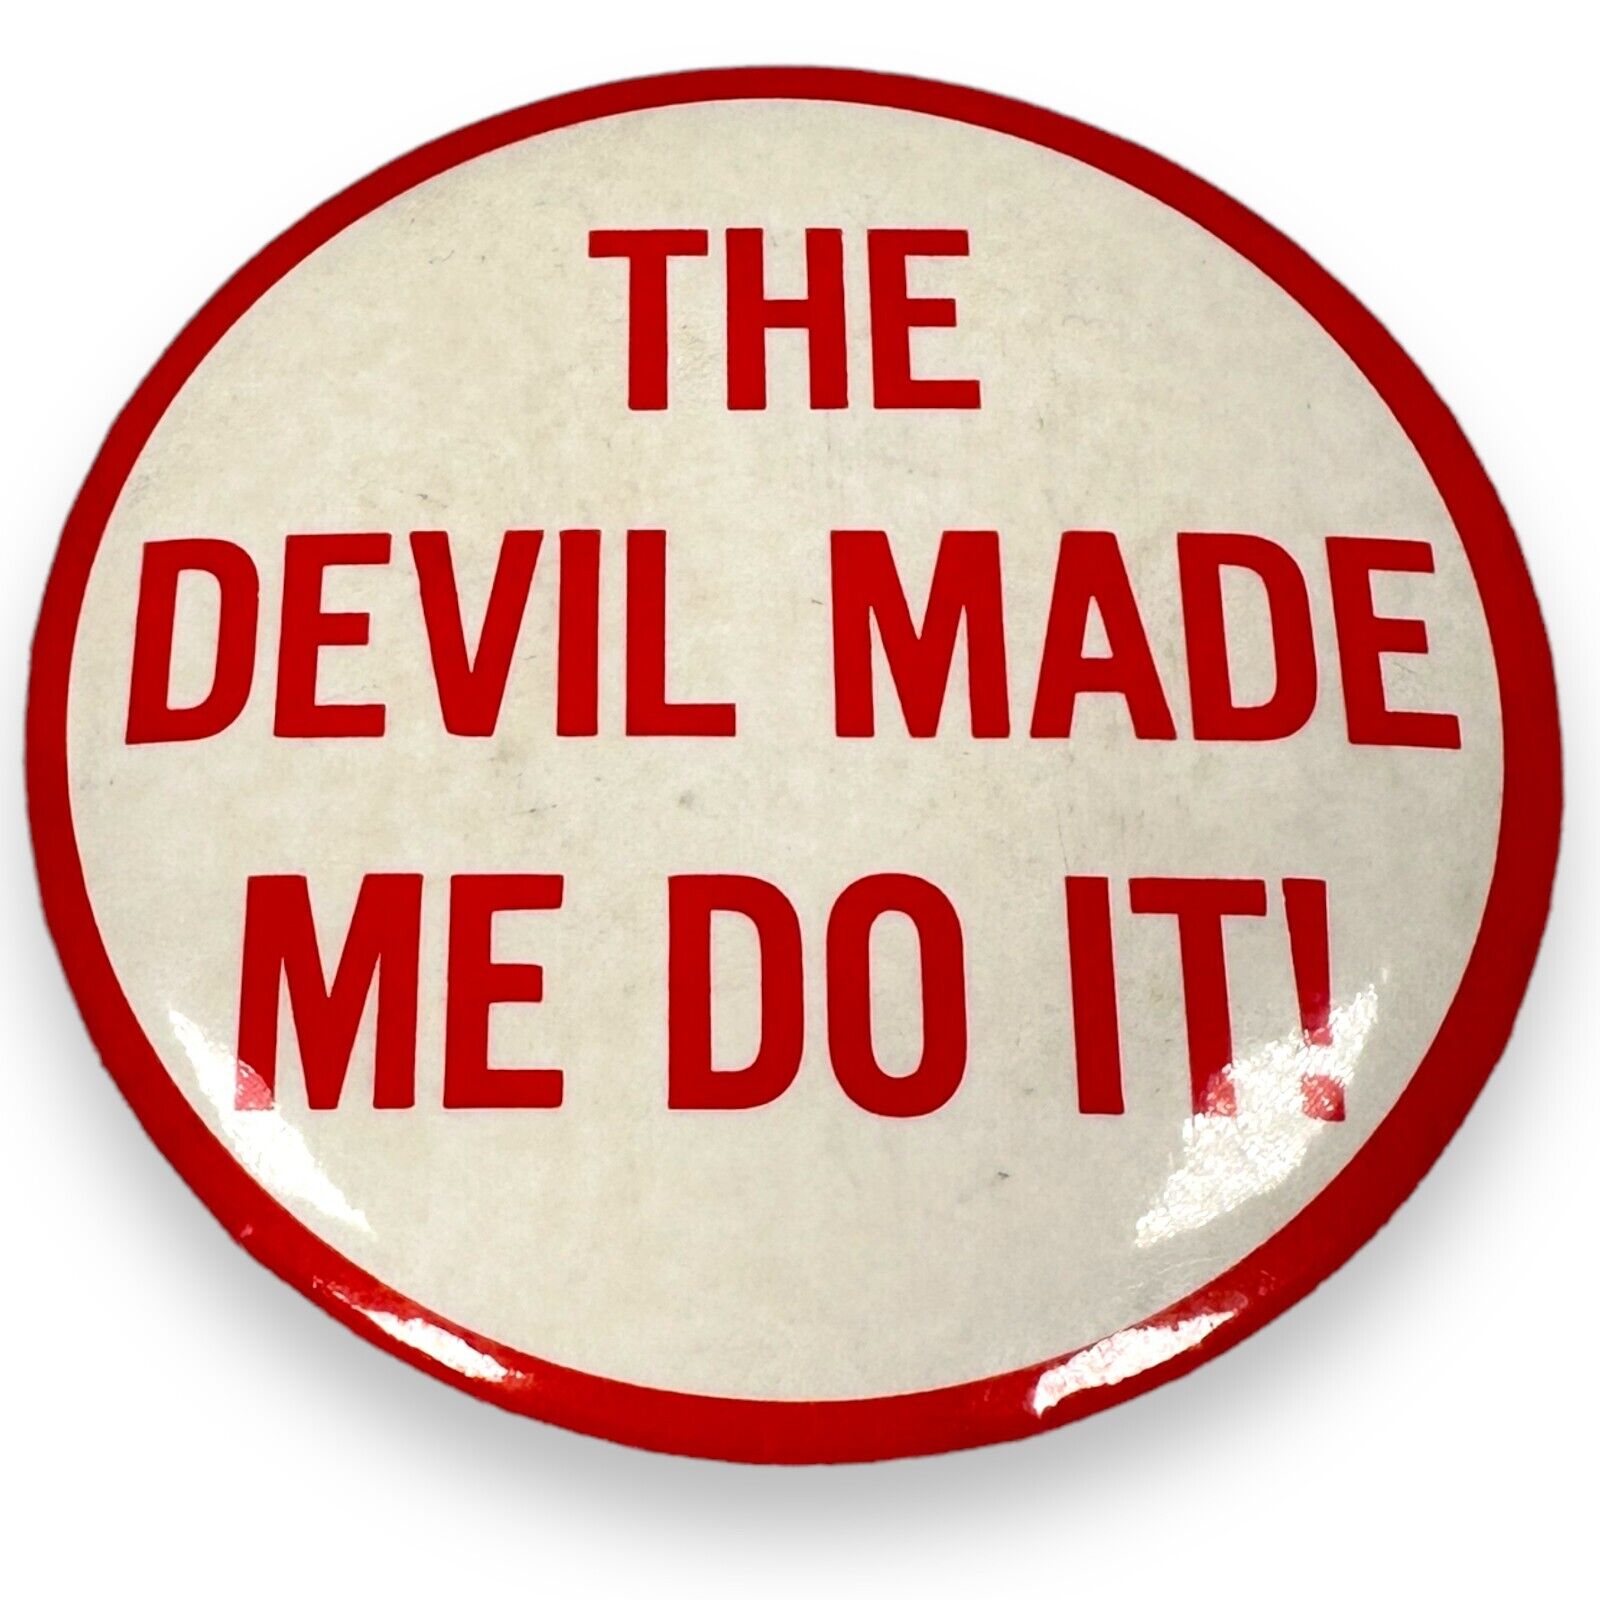 Vintage The Devil Made Me Do it Pin Button Hippie Counter Culture White Red 60s